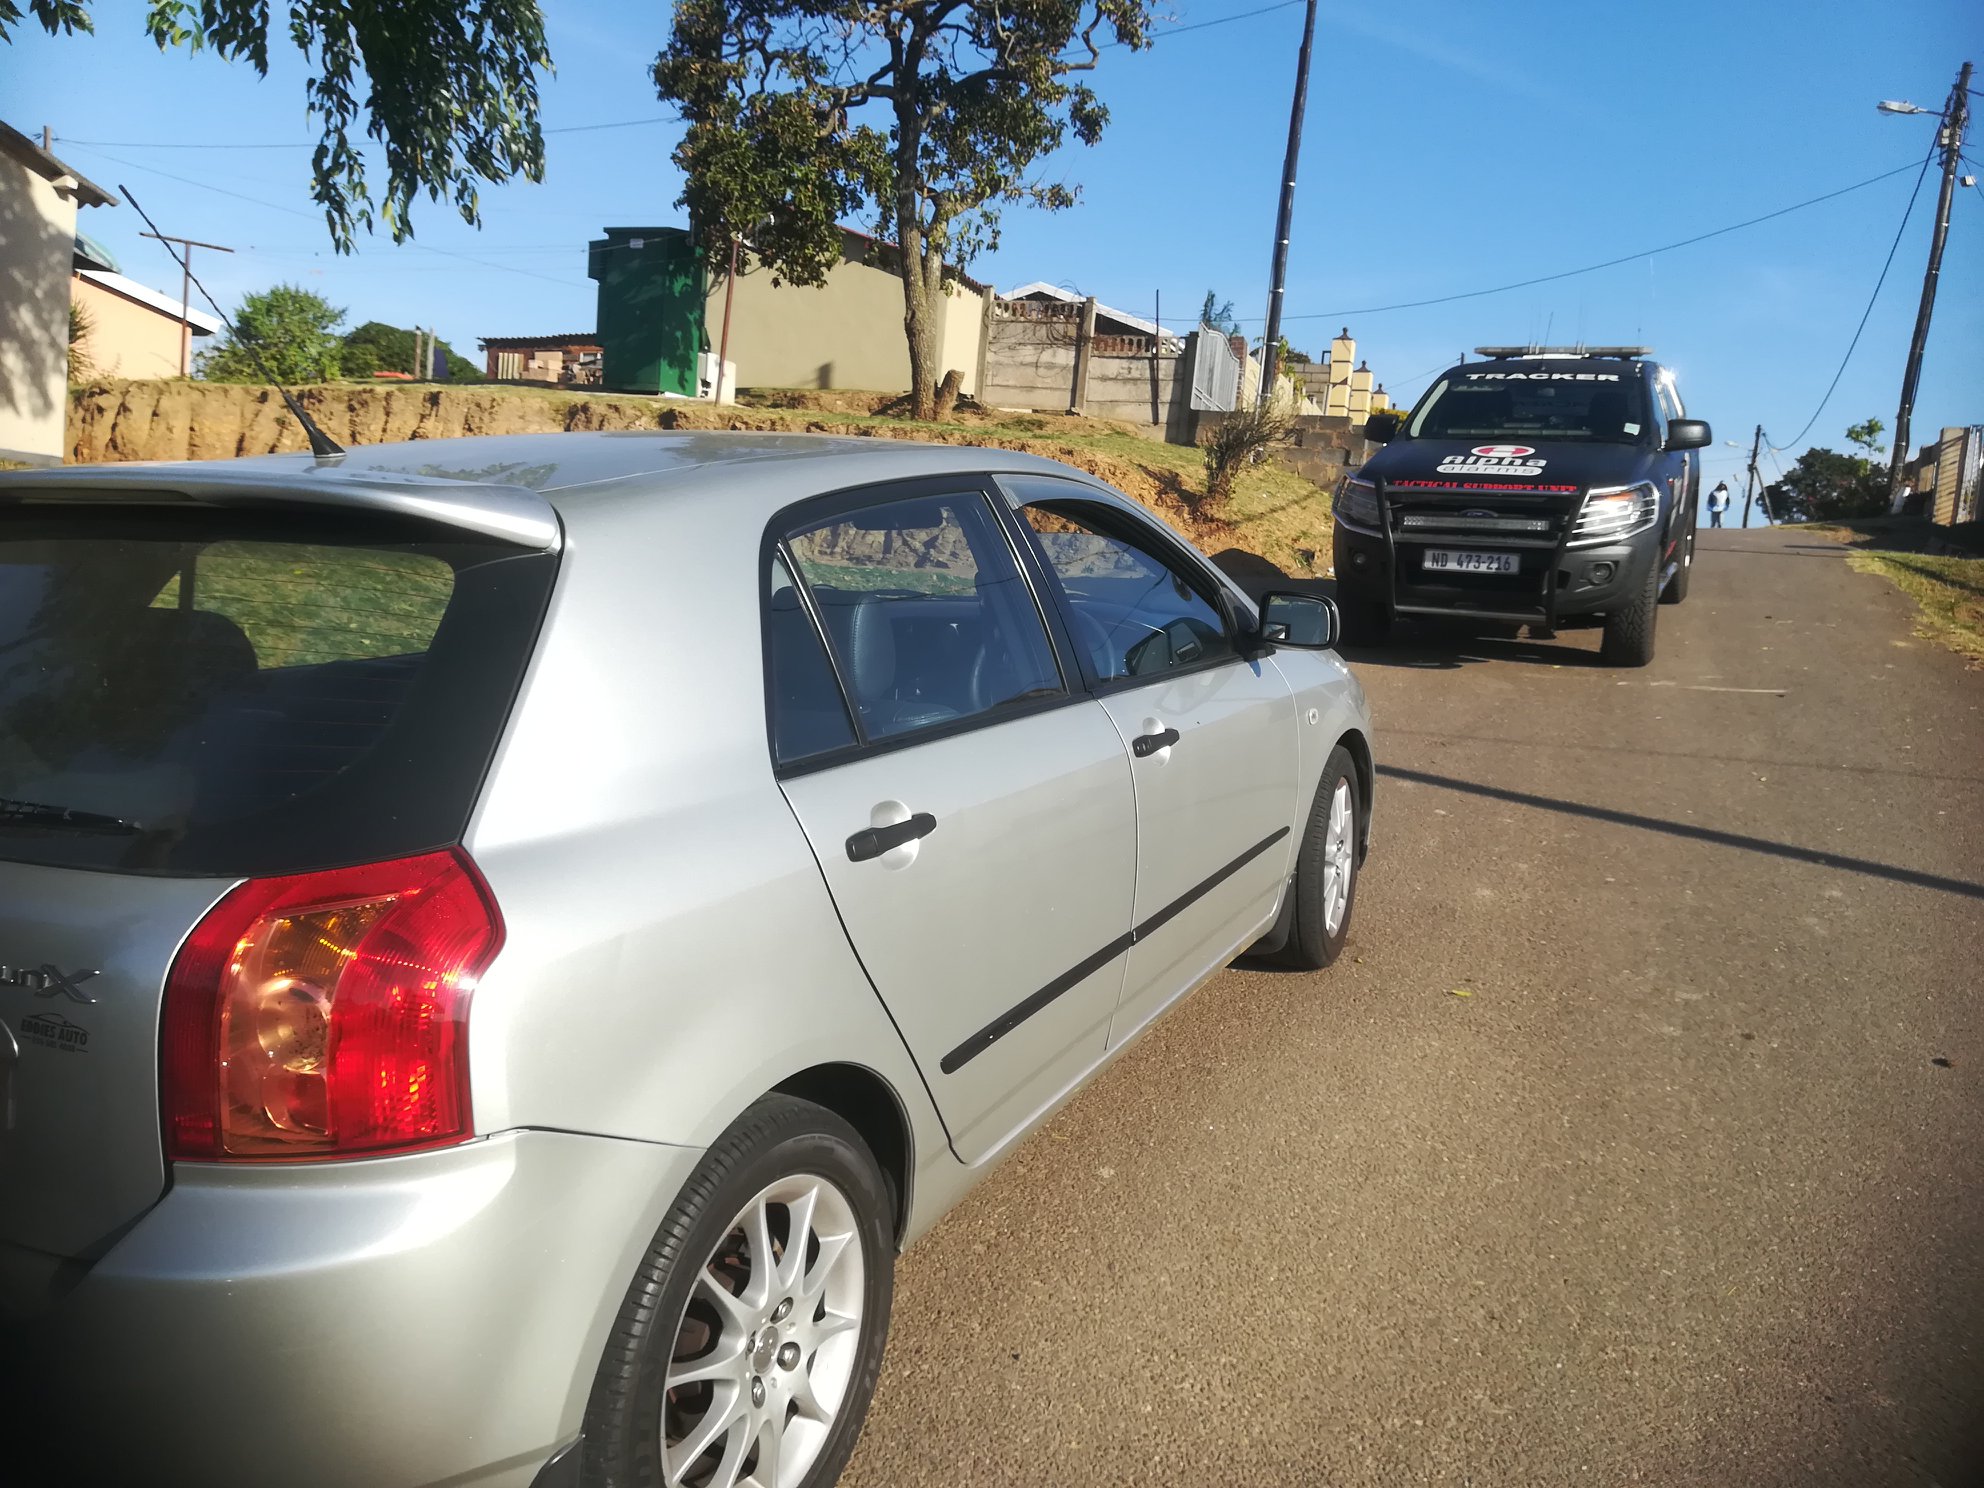 Stolen vehicle from Wentworth recovered in Umlazi